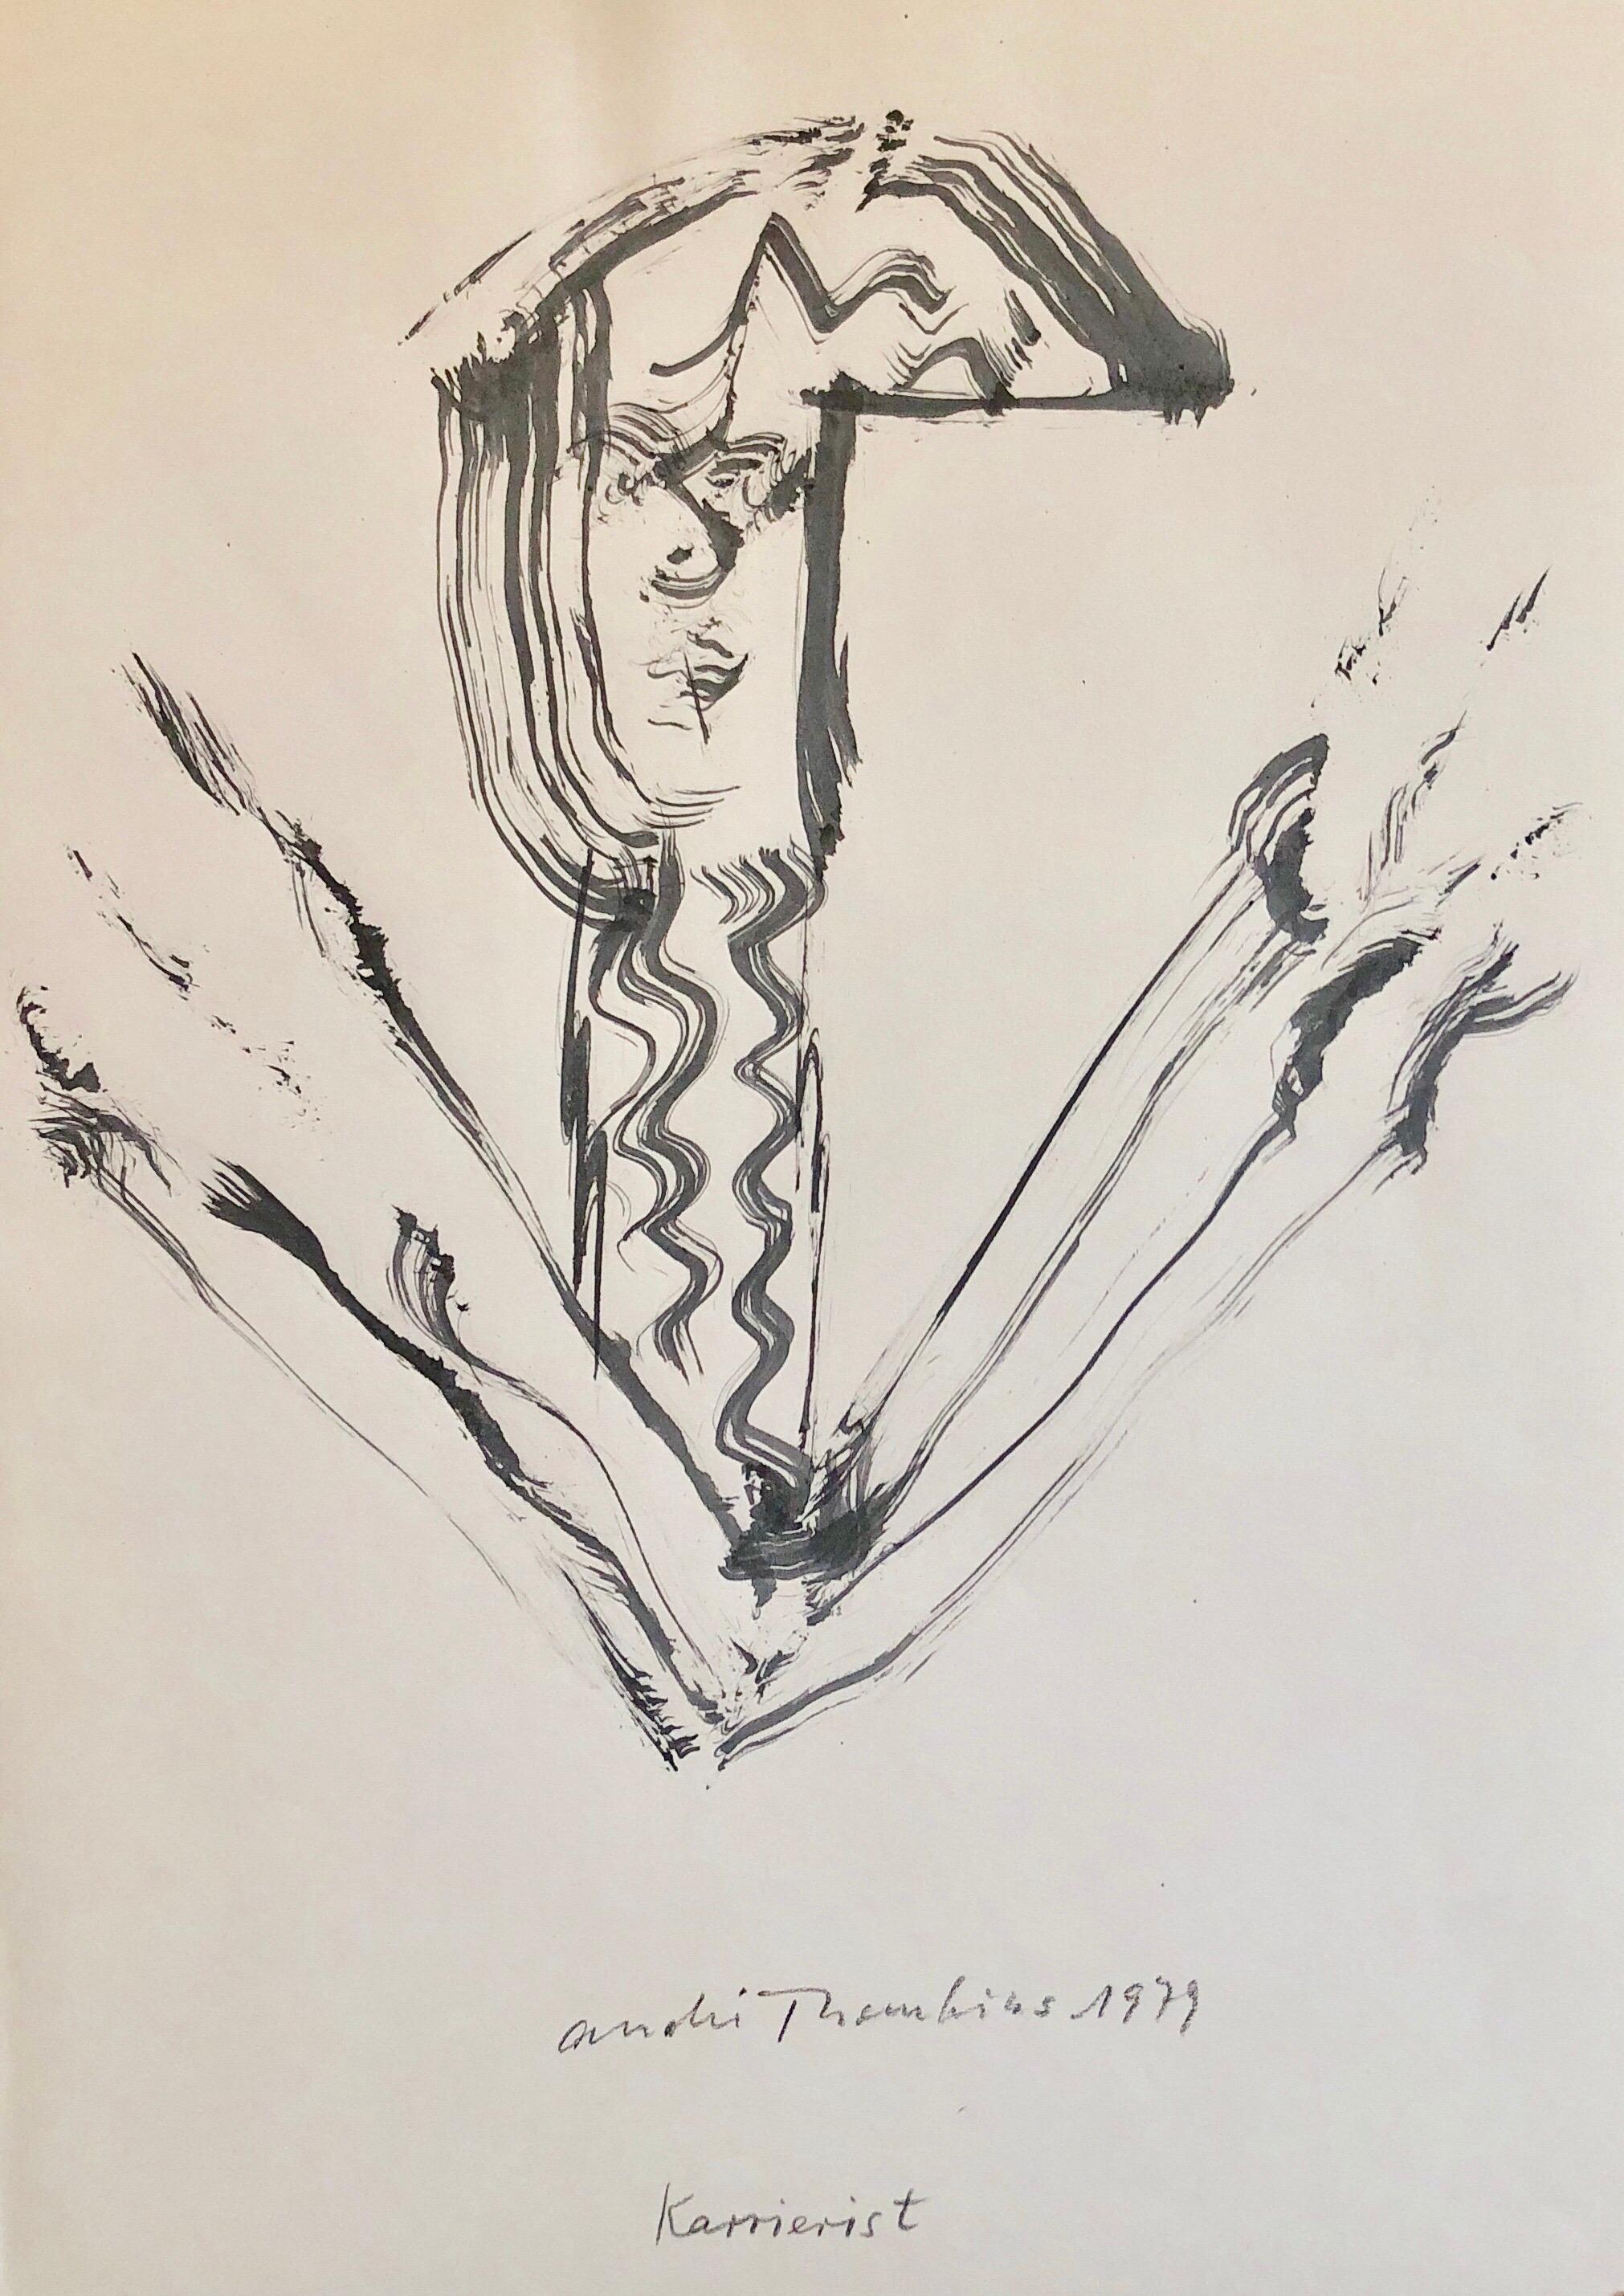 André Thomkins Figurative Art - 70s Modernist Swiss Dada Surrealist Painting Signed Andre Thomkins Brush Drawing